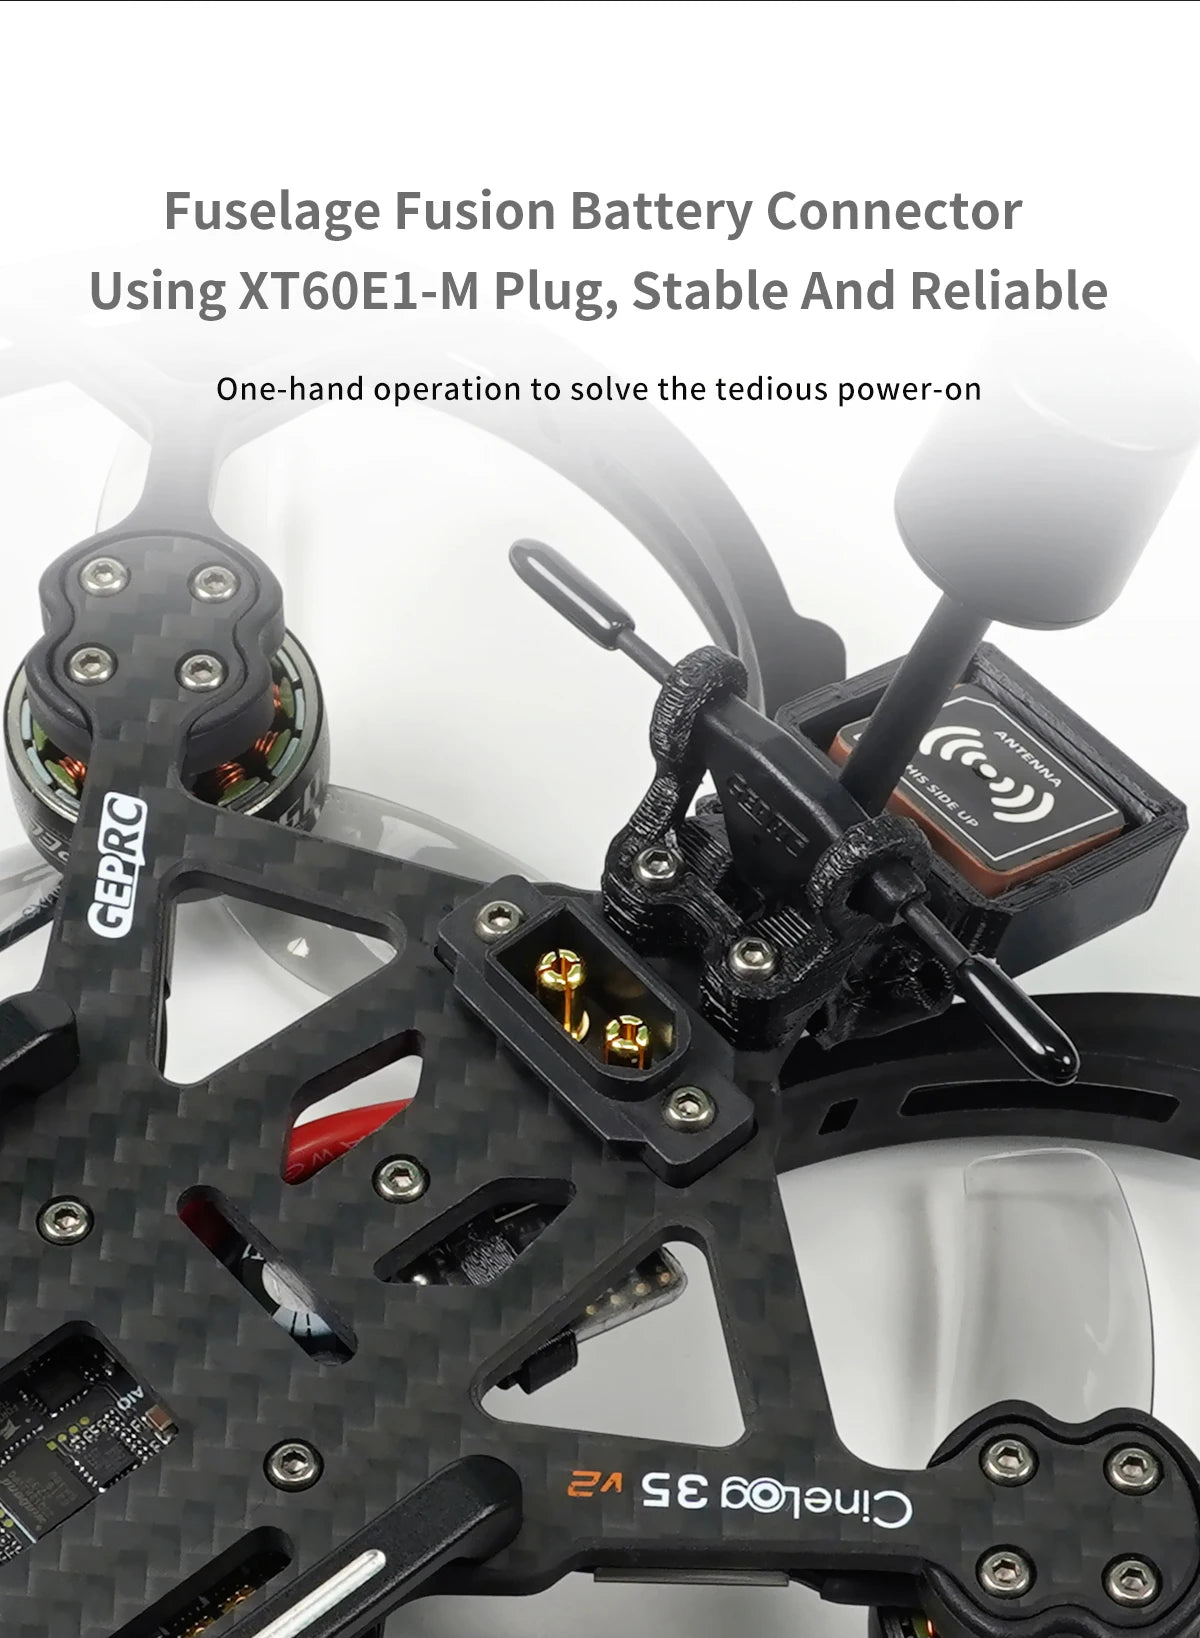 GEPRC CineLog35 V2 HD - Wasp FPV, GEPRC CineLog35 V2 HD, Fusion Battery Connector Using XTGOE1-M Plug, Stable And Re